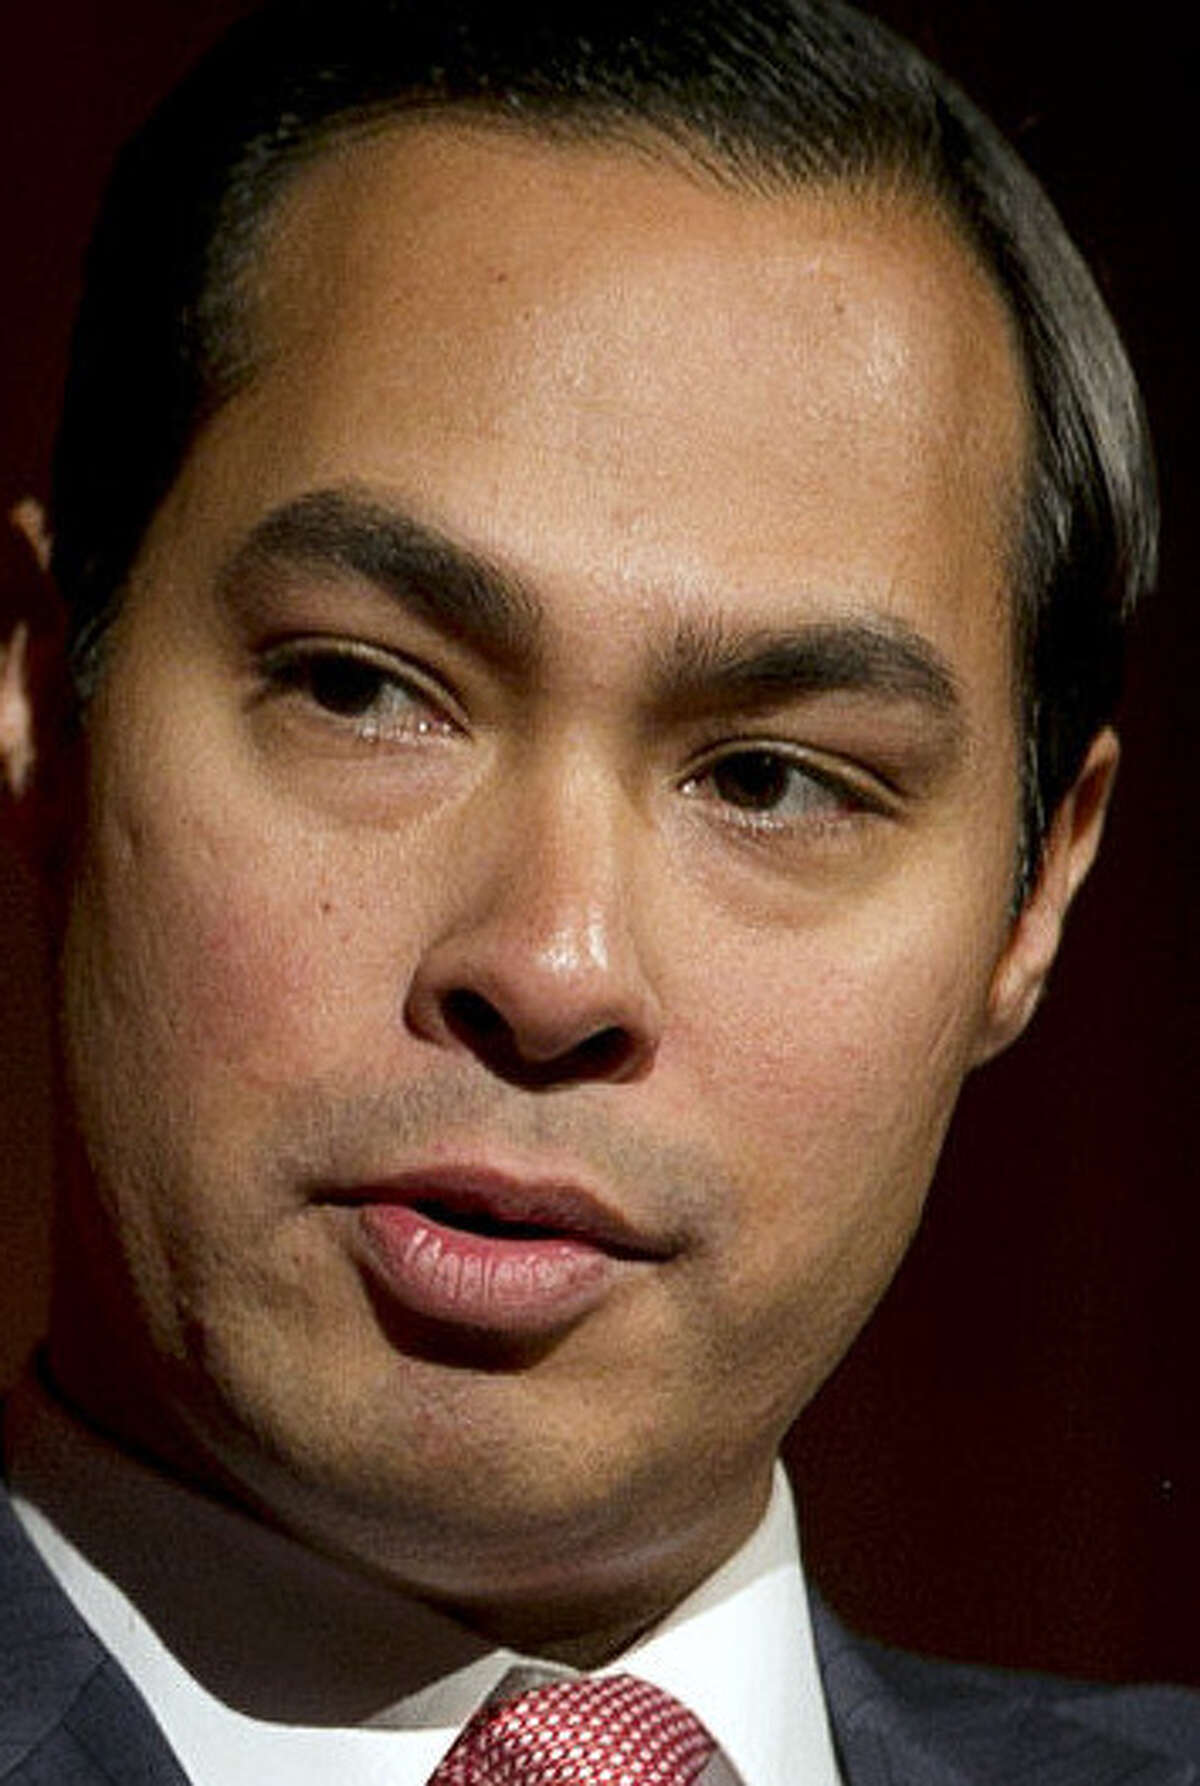 Mayor Julián Castro has supported young immigrants known as DREAMers.